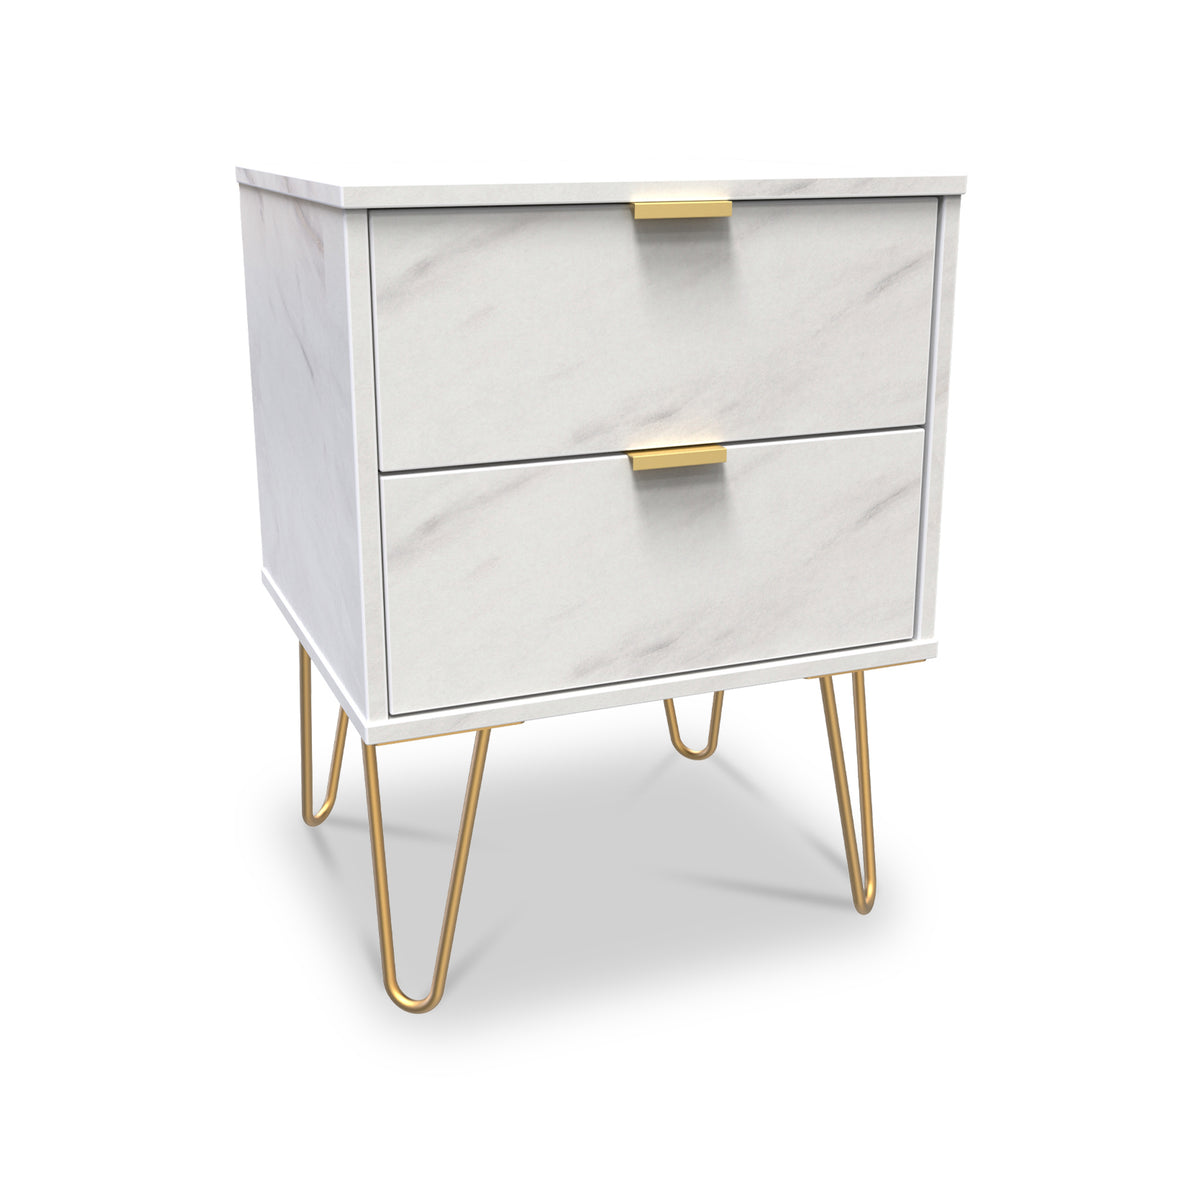 Moreno Marble 2 Drawer Bedside Table from Roseland Furniture